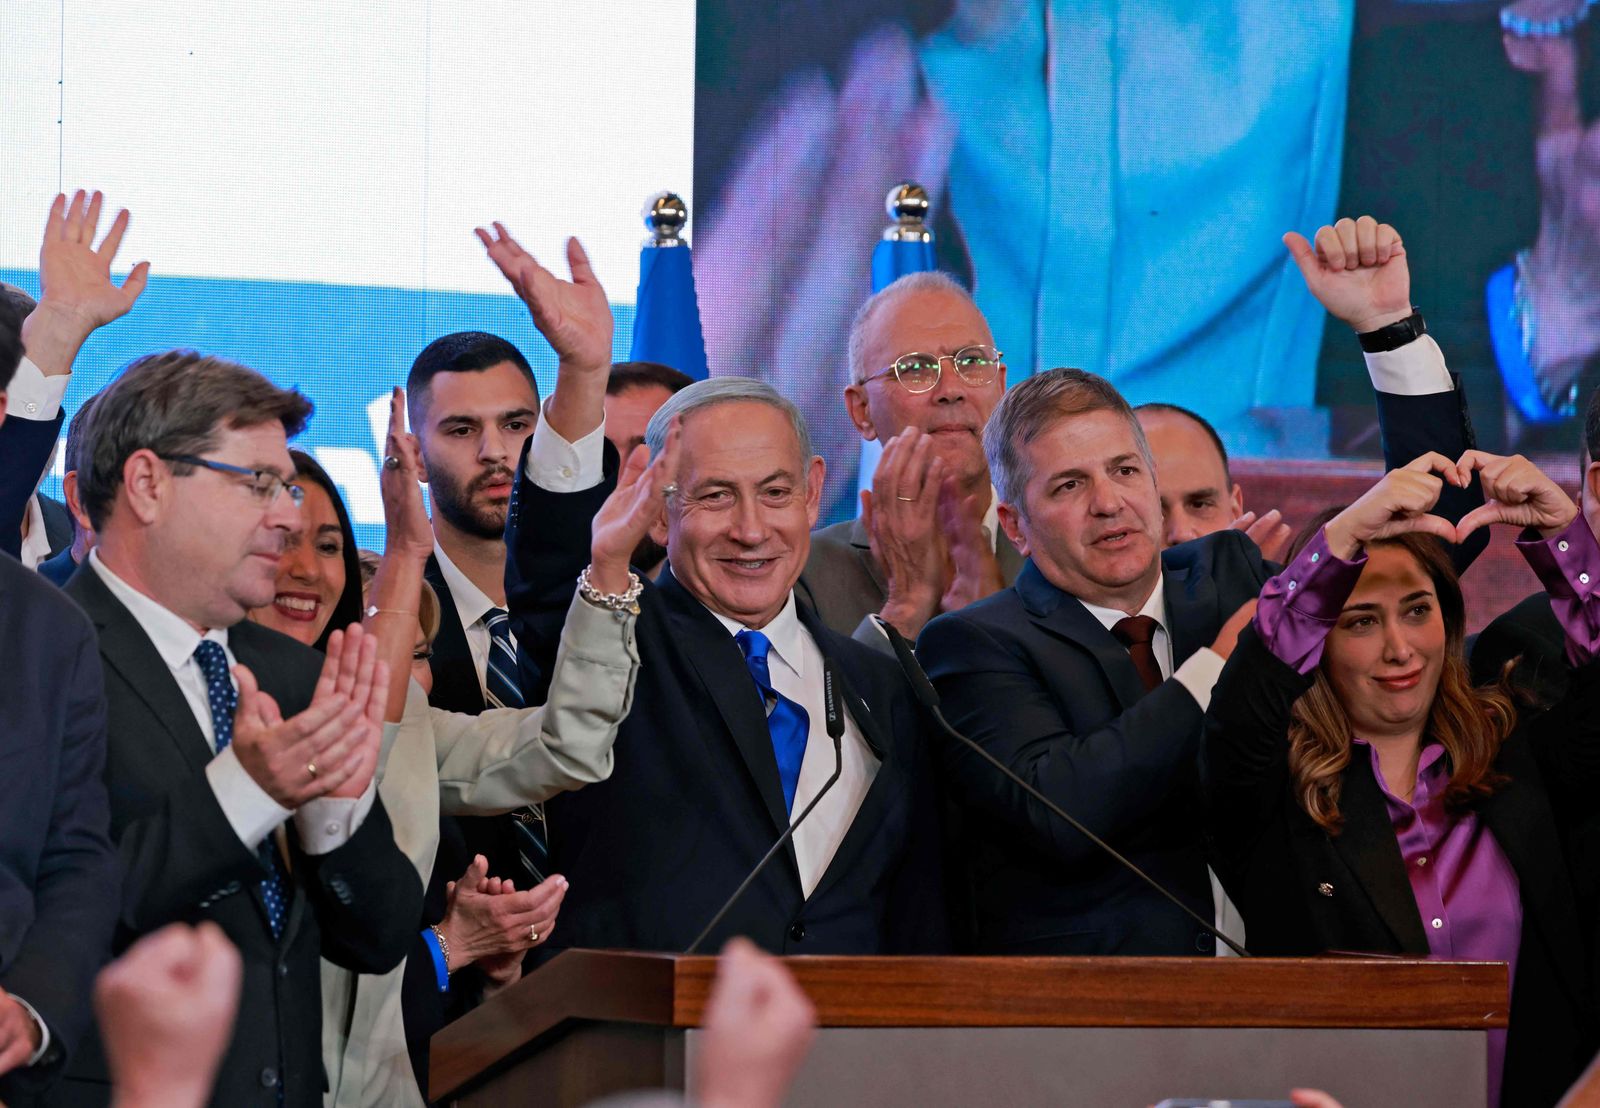 Israel's ex-premier and leader of the Likud party Benjamin Netanyahu addresses supporters at campaign headquarters in Jerusalem early on November 2, 2022, after the end of voting for national elections. - Netanyahu inched towards reclaiming power after projected election results showed a majority government was within reach for the veteran right-winger, but the outlook could shift as ballots are counted. (Photo by Menahem KAHANA / AFP) - AFP